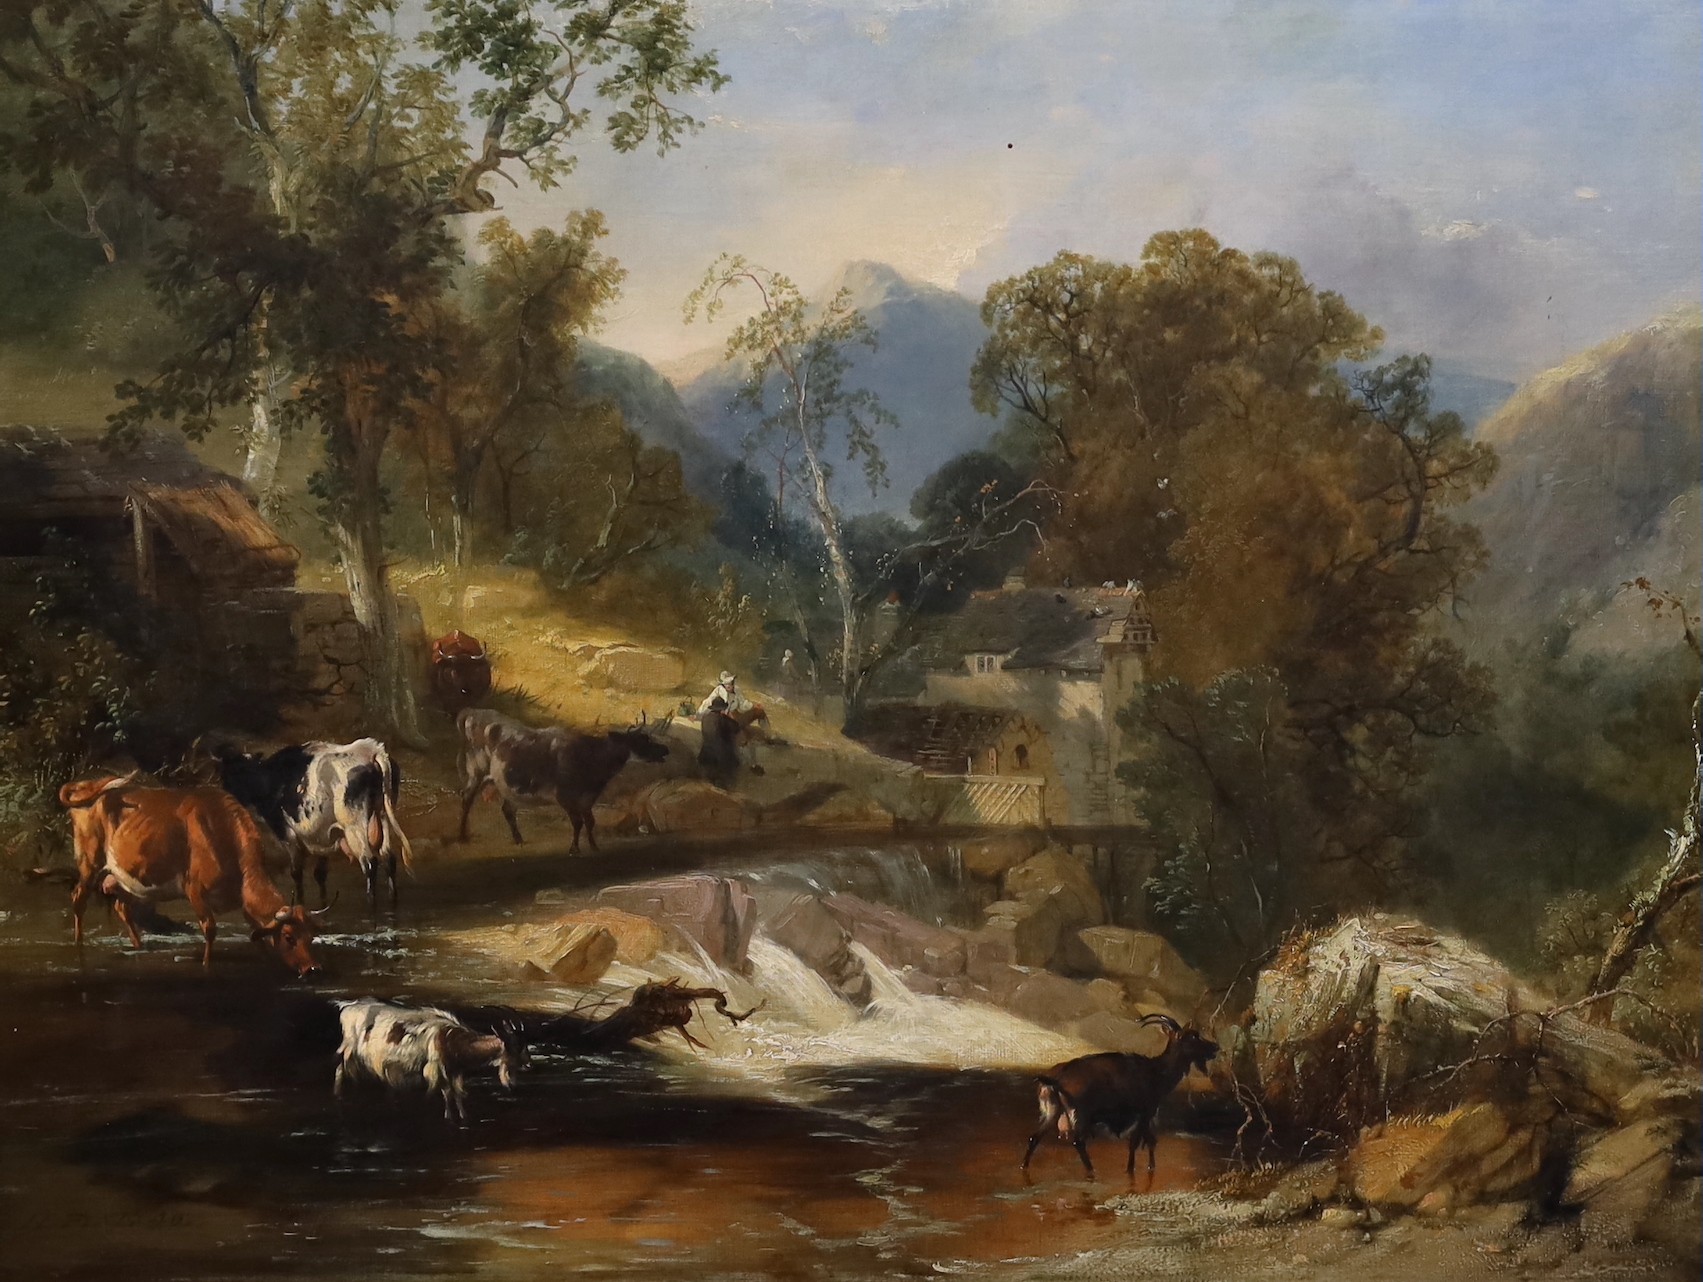 James Baker Pyne (1800-1870) and Thomas Sidney Cooper CVO RA (1803-1902), 'Tullina Mill at Penmacho, North Wales', oil on canvas, 54.5 x 72cm